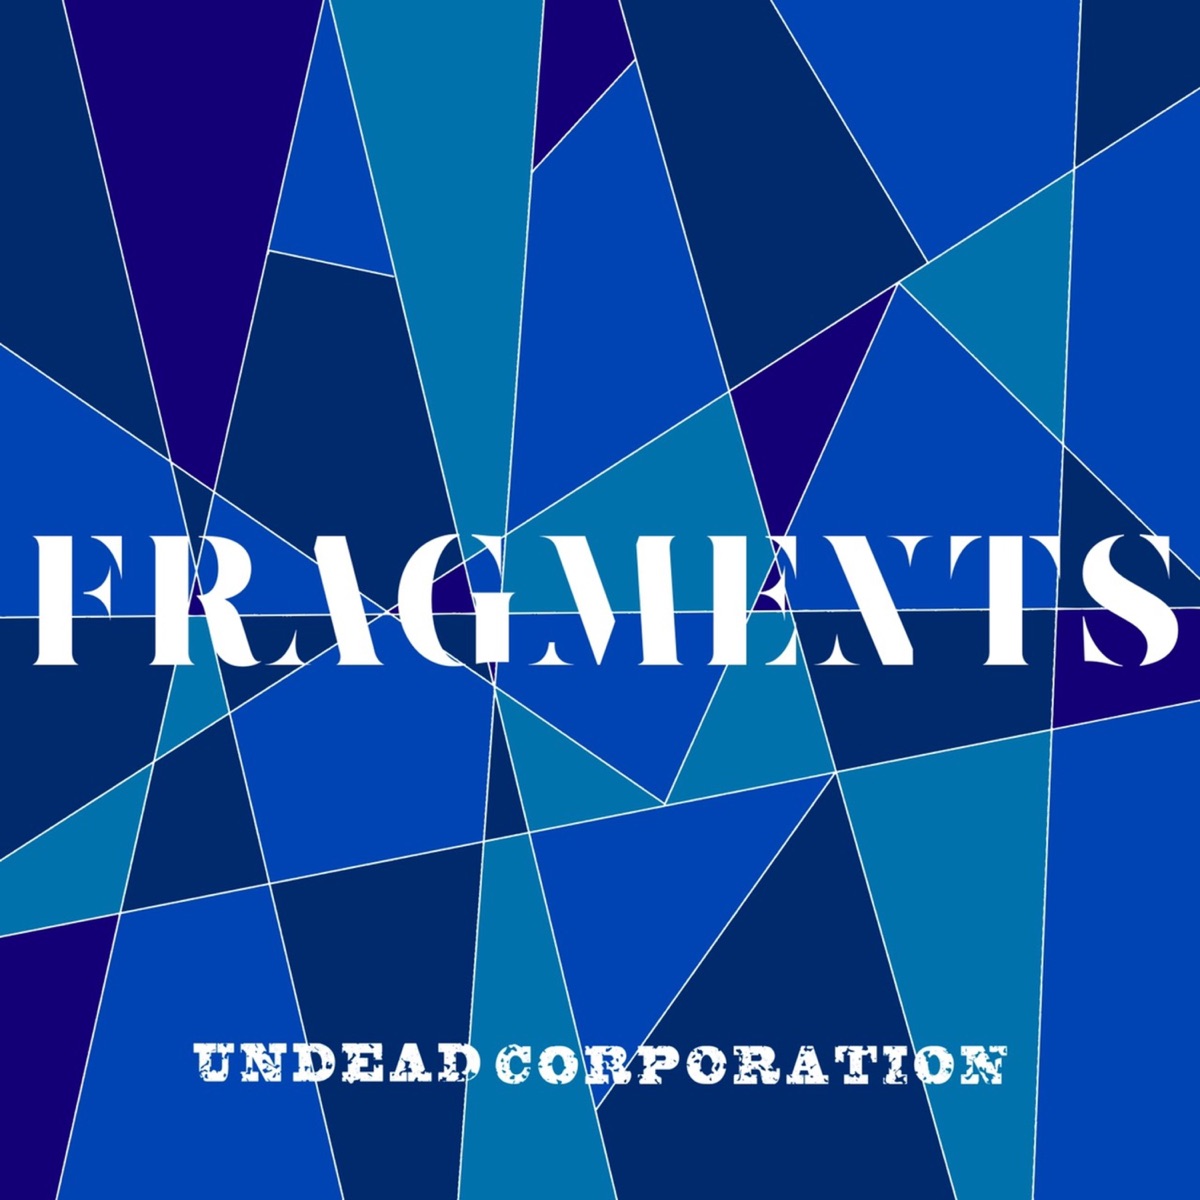 Cover for『UNDEAD CORPORATION - Fragments』from the release『Fragments』